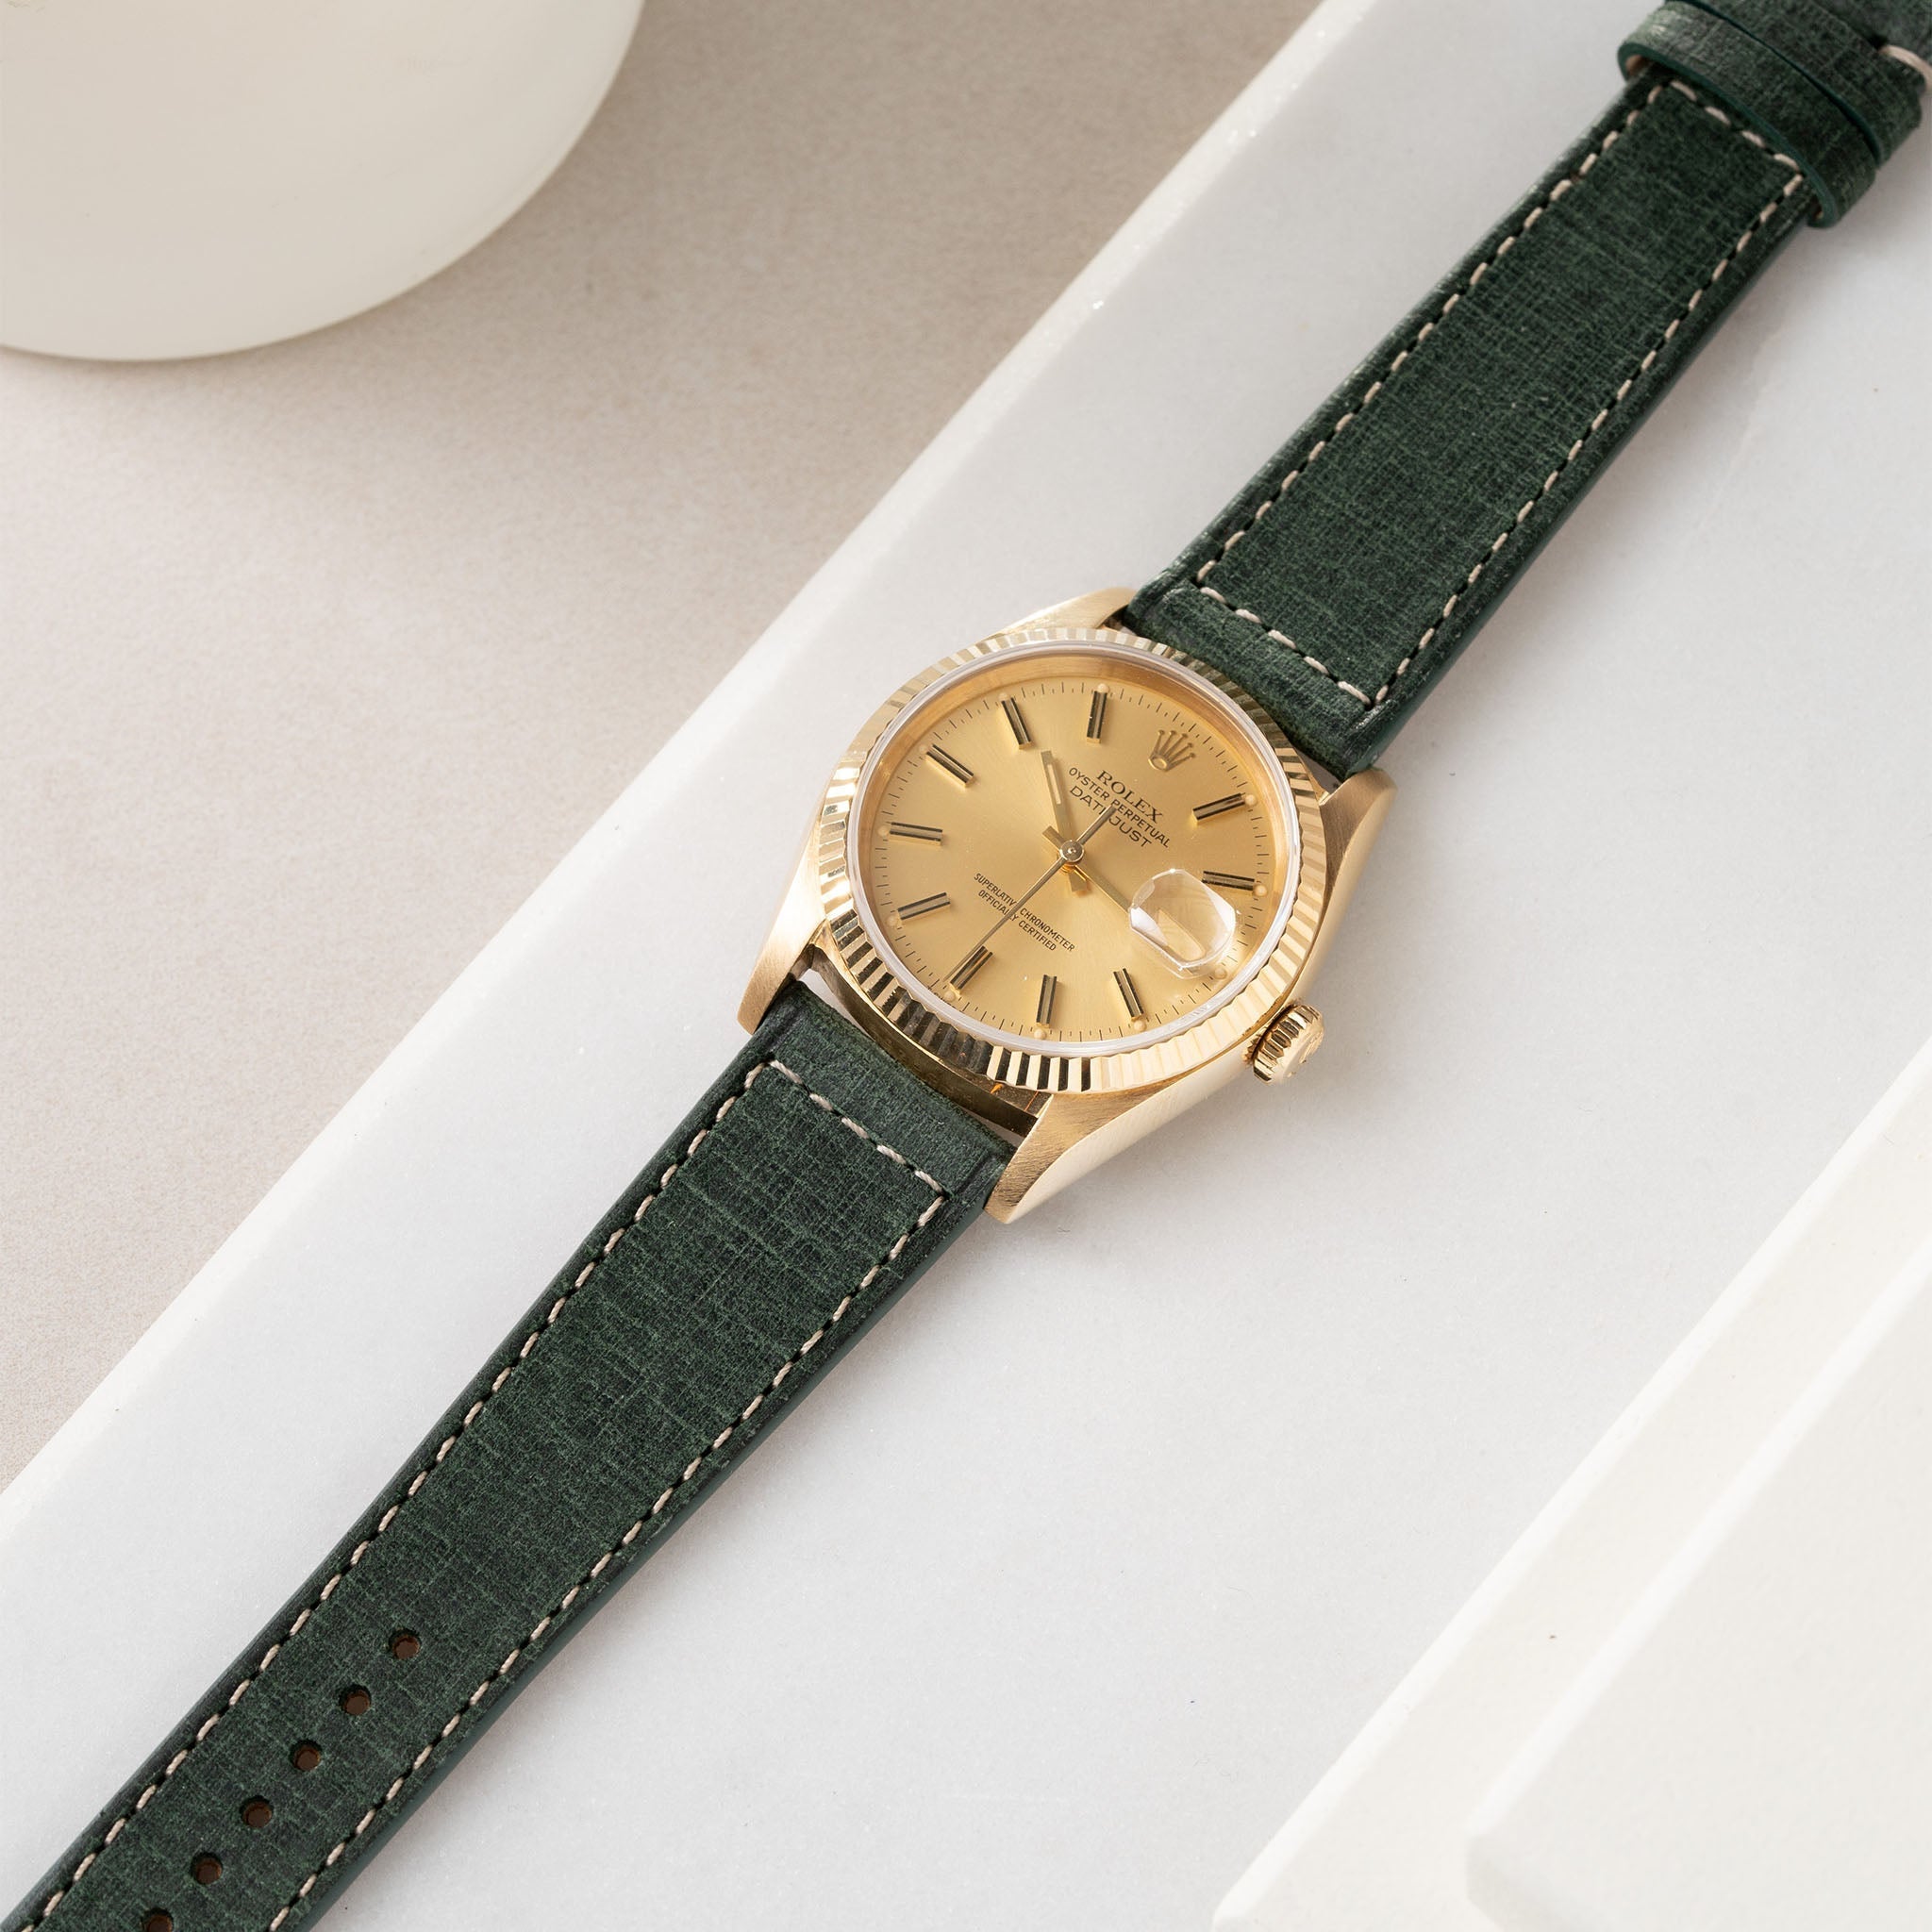 Linen Boxed Leather Watch Strap - Elegant Green